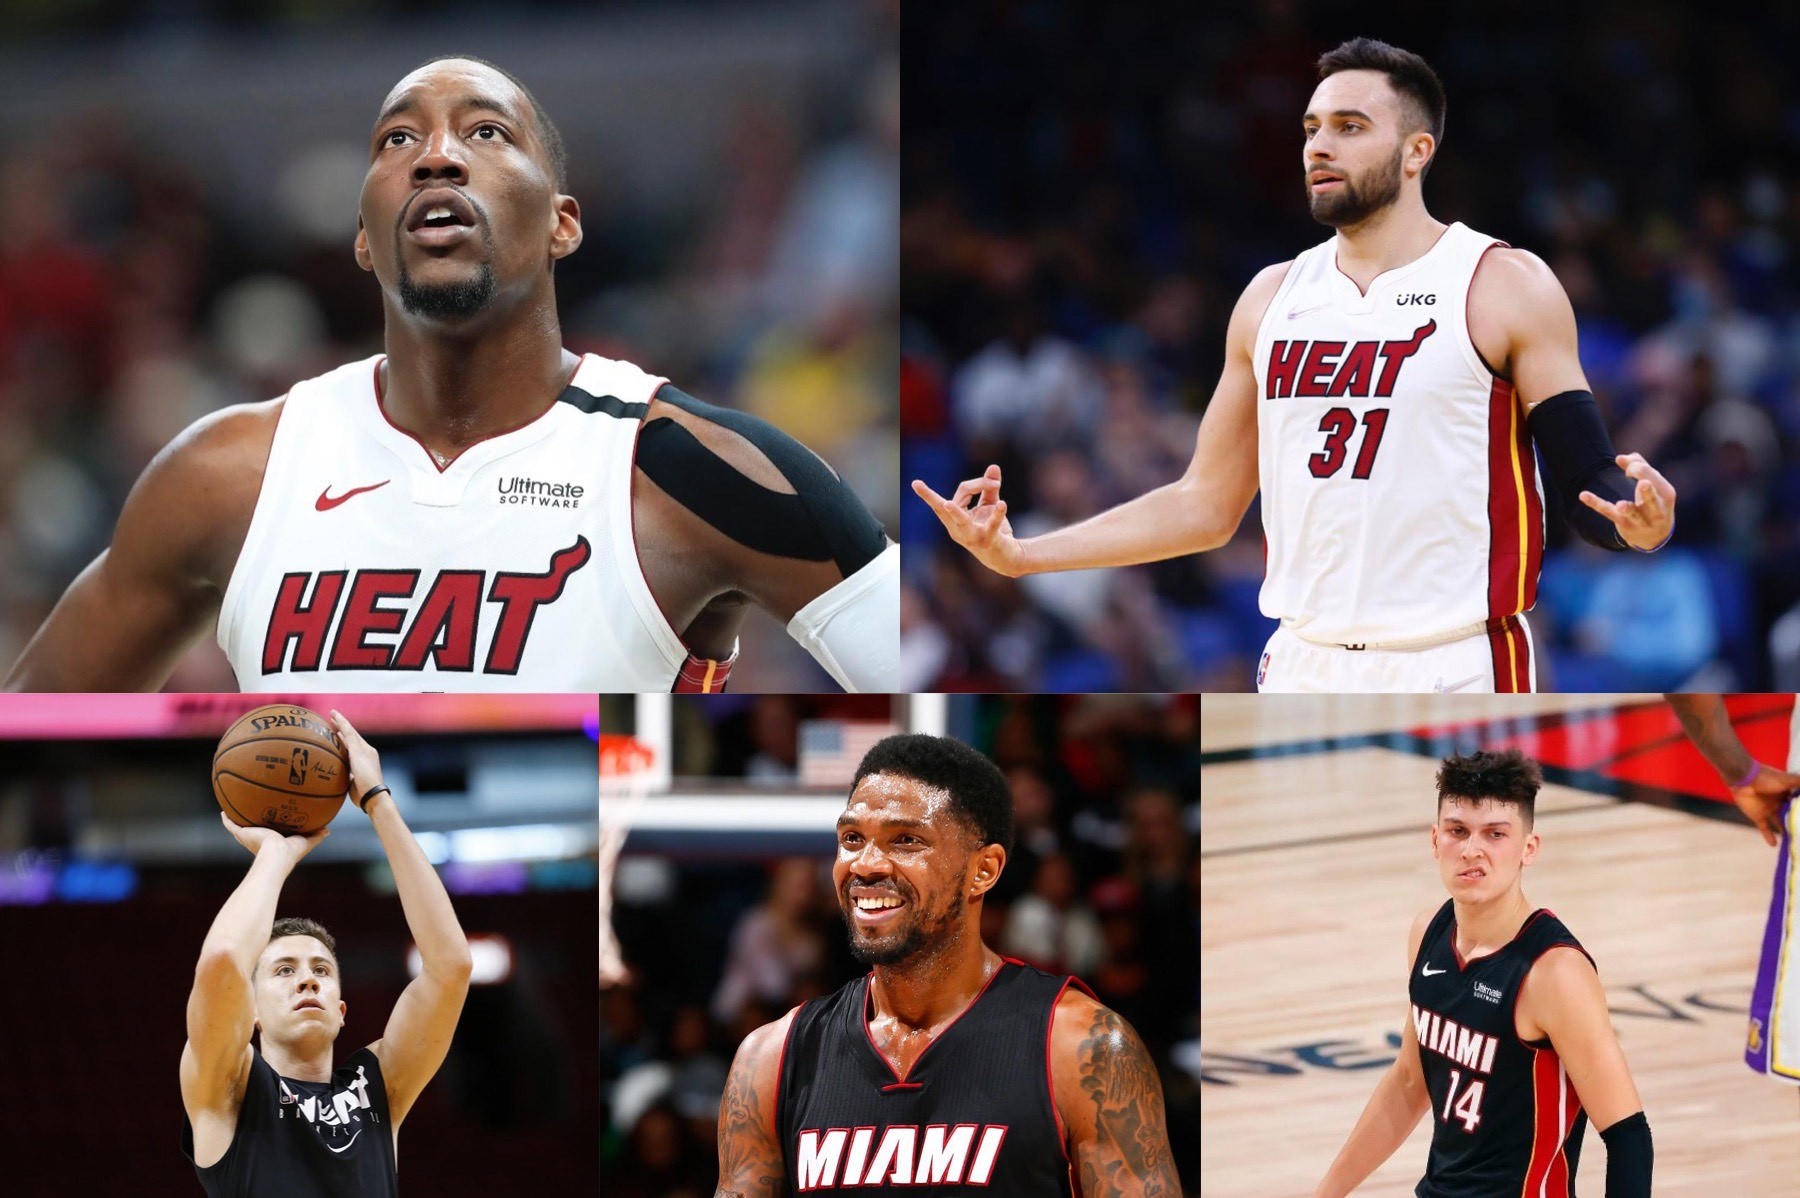 Miami Heat: 4 players who could win awards in 2021